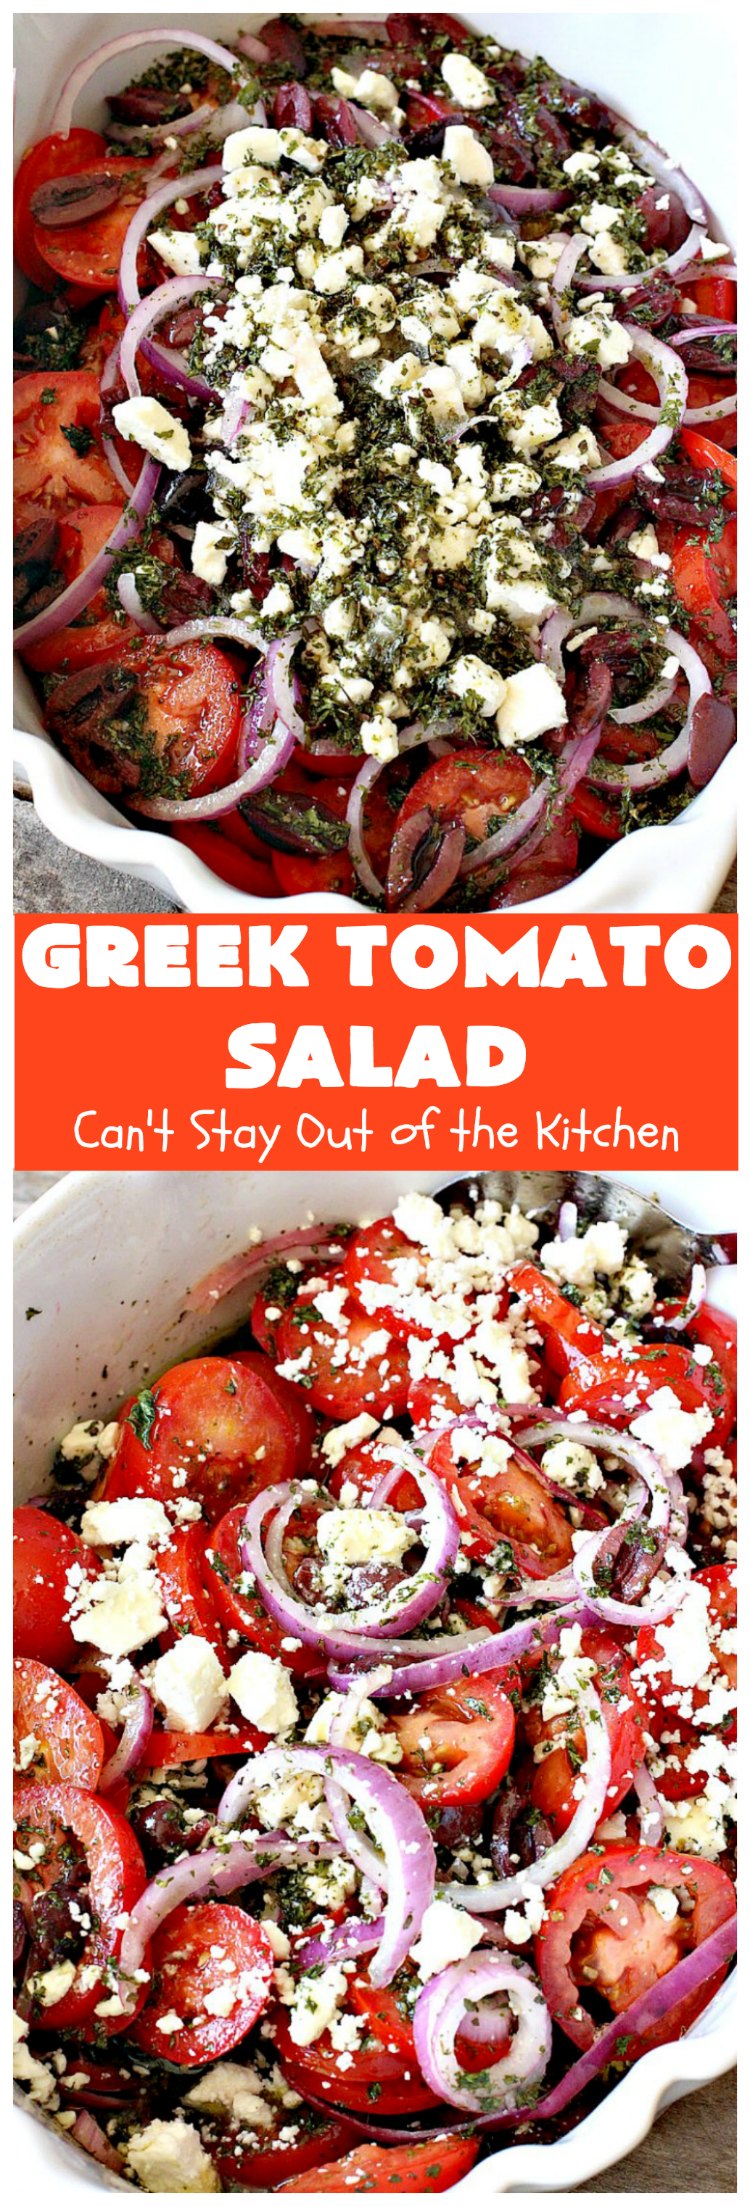 Greek Tomato Salad | Can't Stay Out of the Kitchen